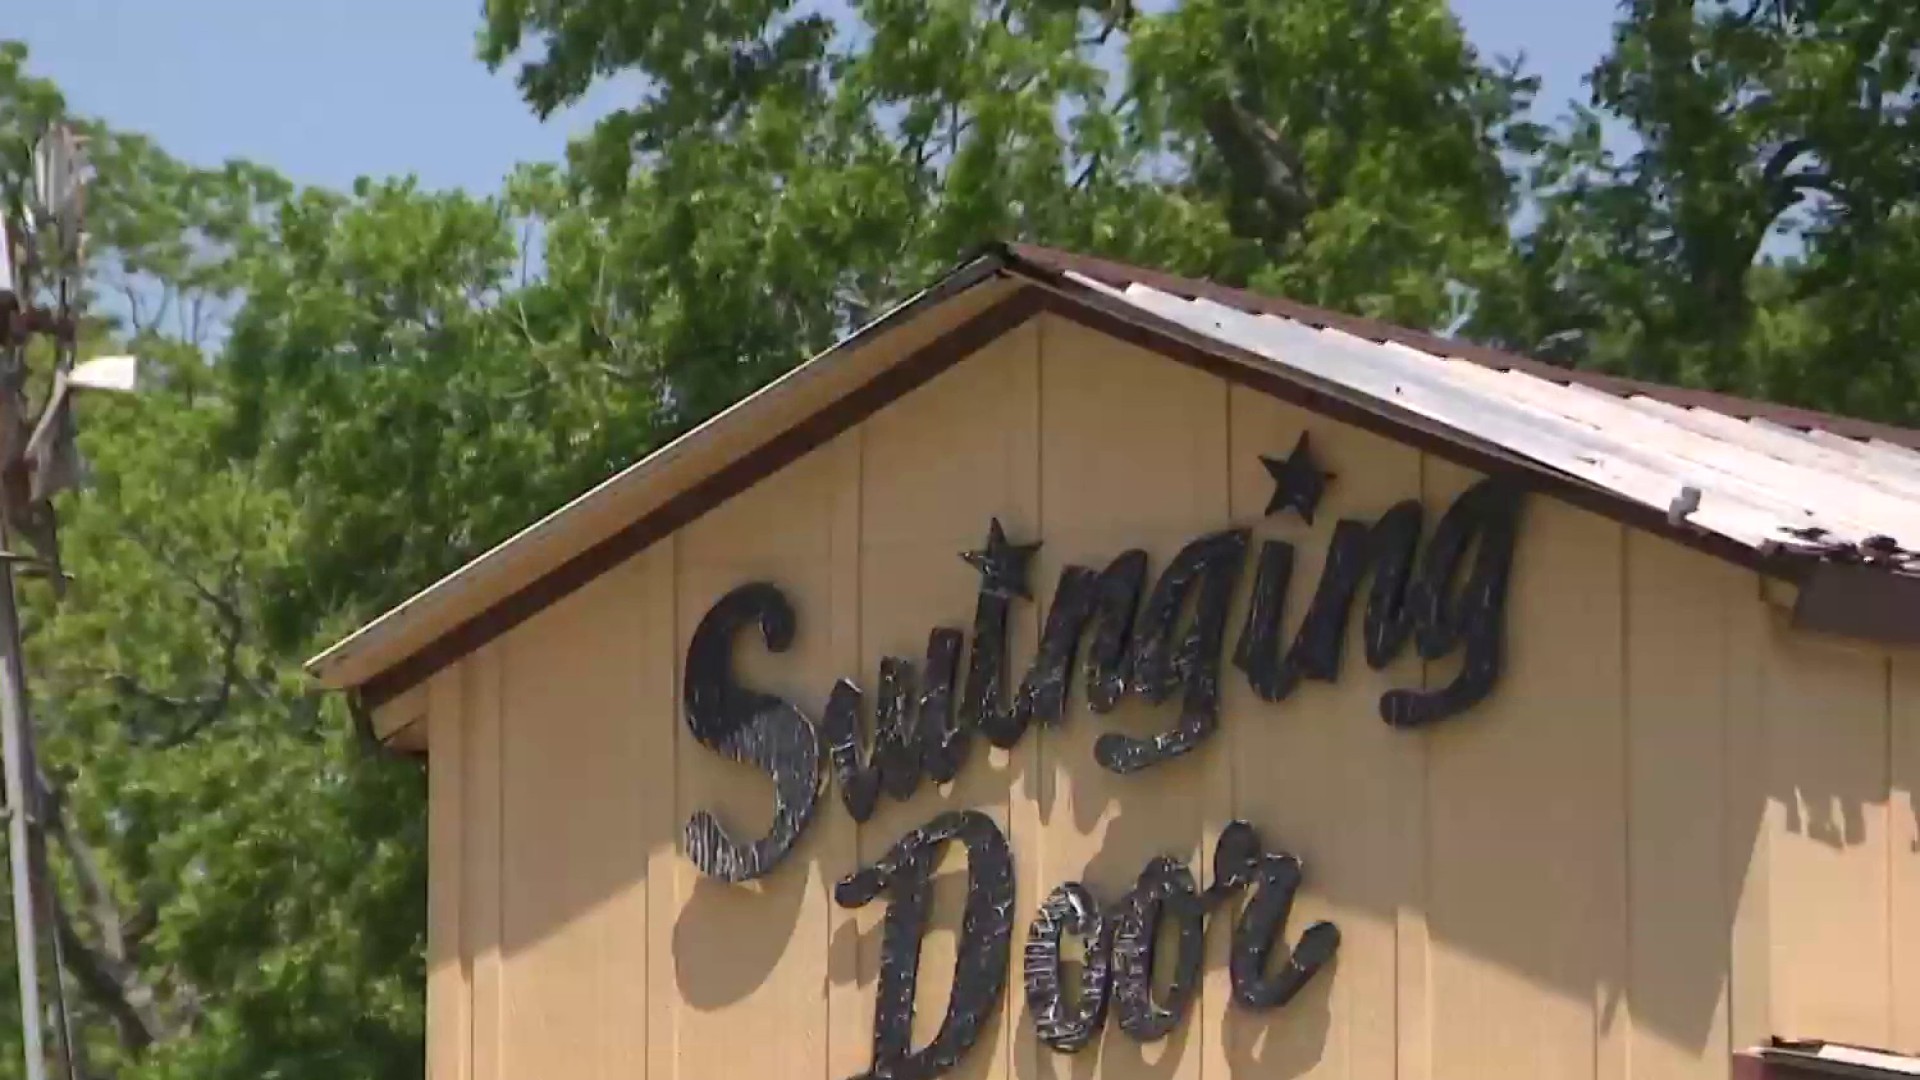 The Swinging Door in Richmond closing after 50 years